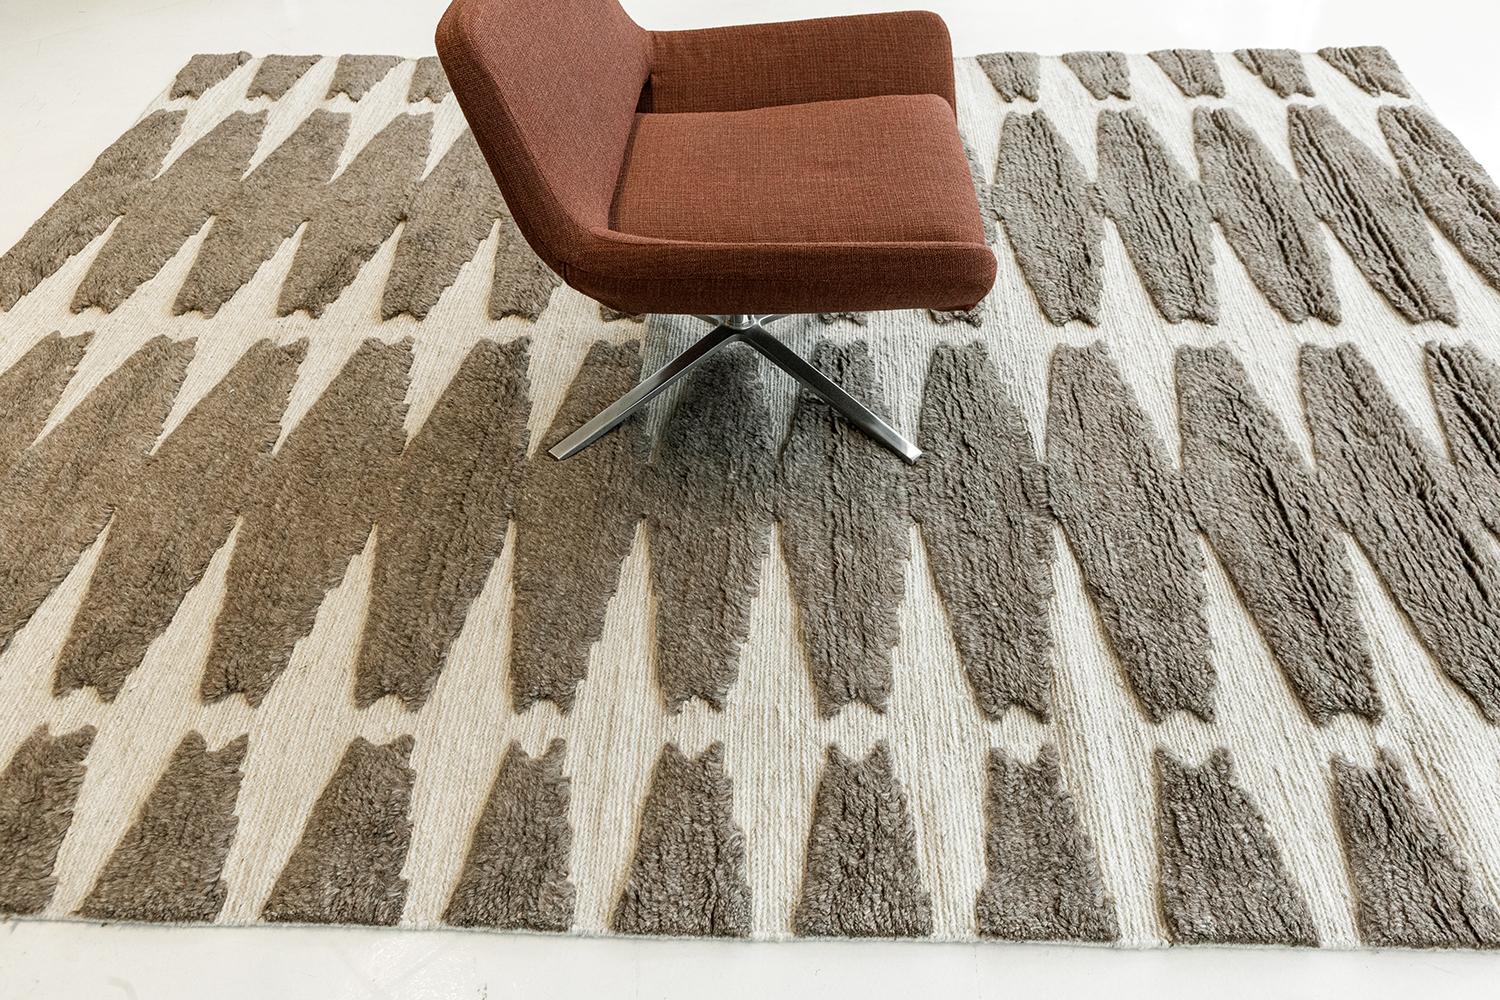 Pantera features an all-over cocoa brown lozenge motif on an ivory field. The textural contrast of embossed pile and flatweave ground delights the foot. Refined design is matched with vivid tonal palettes in the Michael Berman Collection. These are